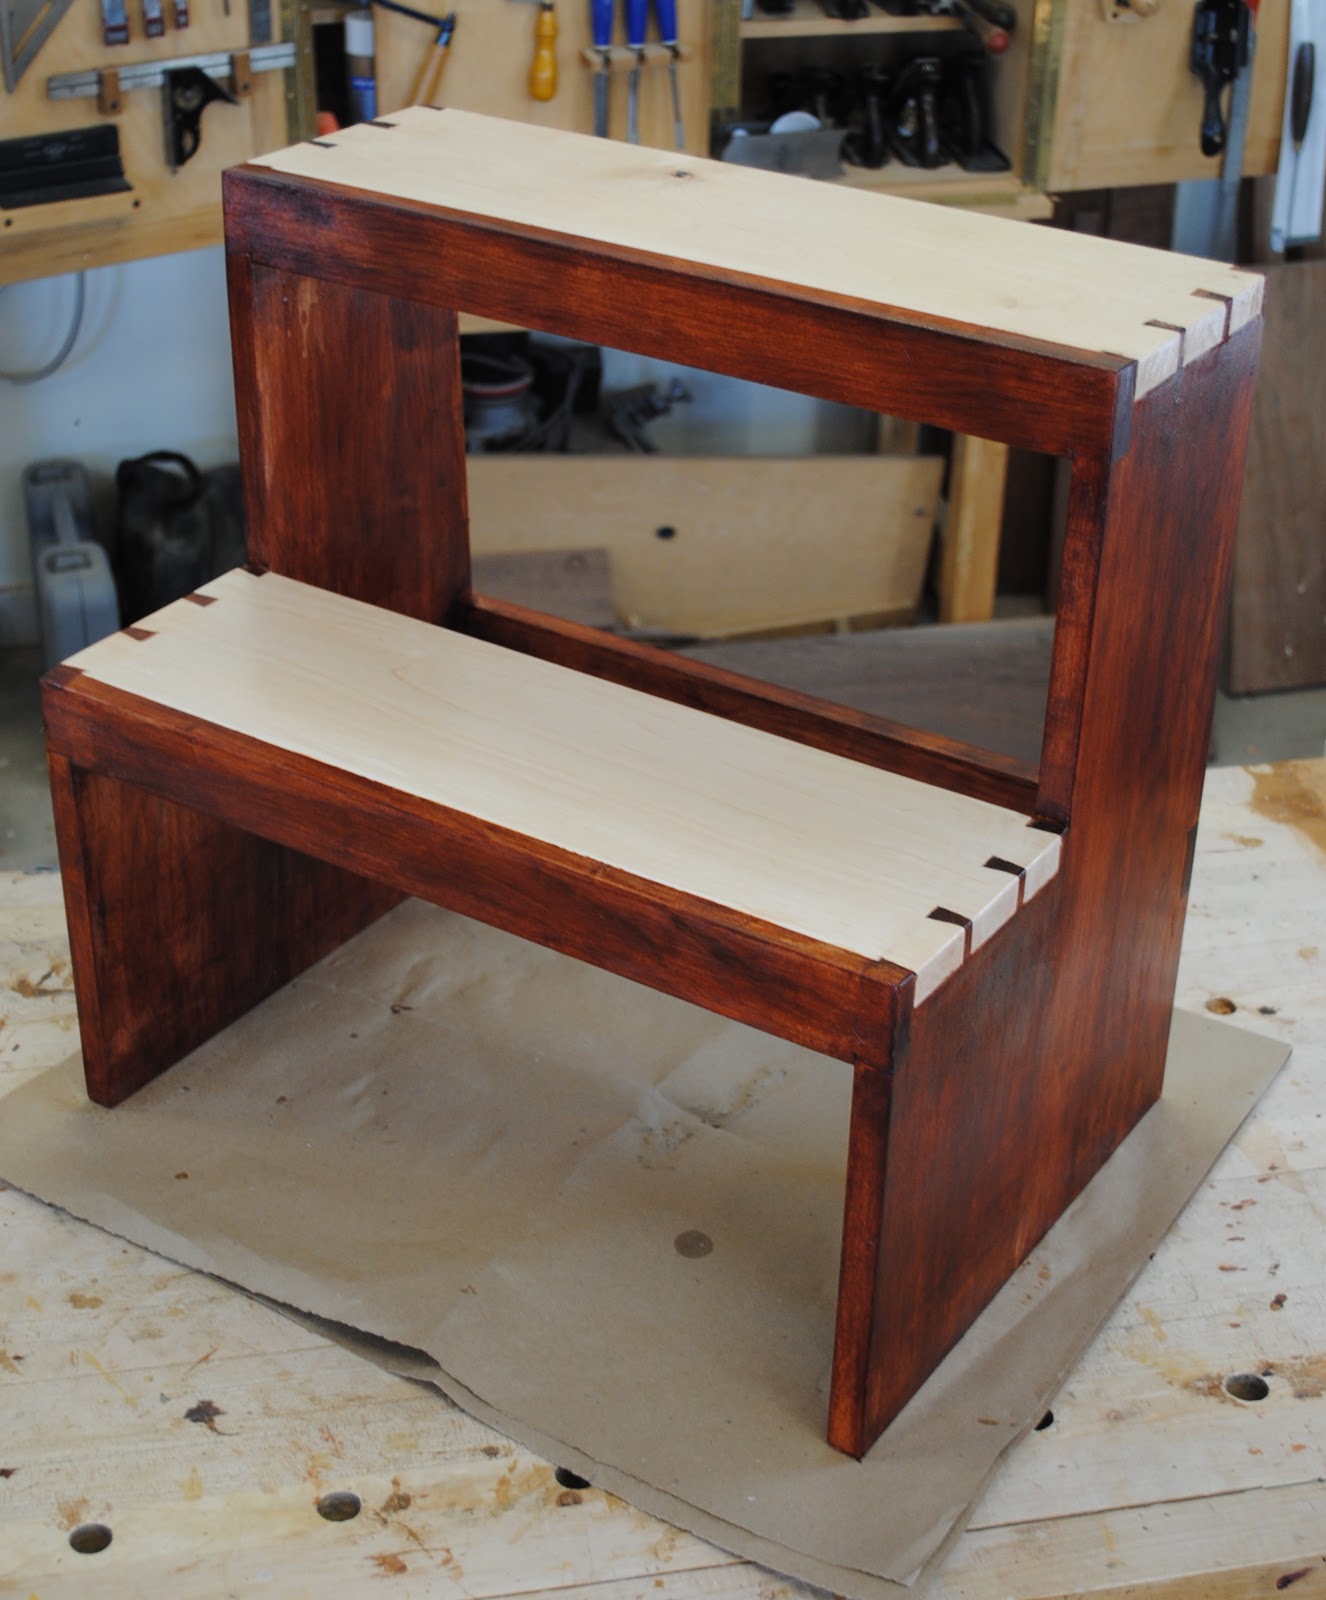 Minanda: Woodworking plans for a step stool